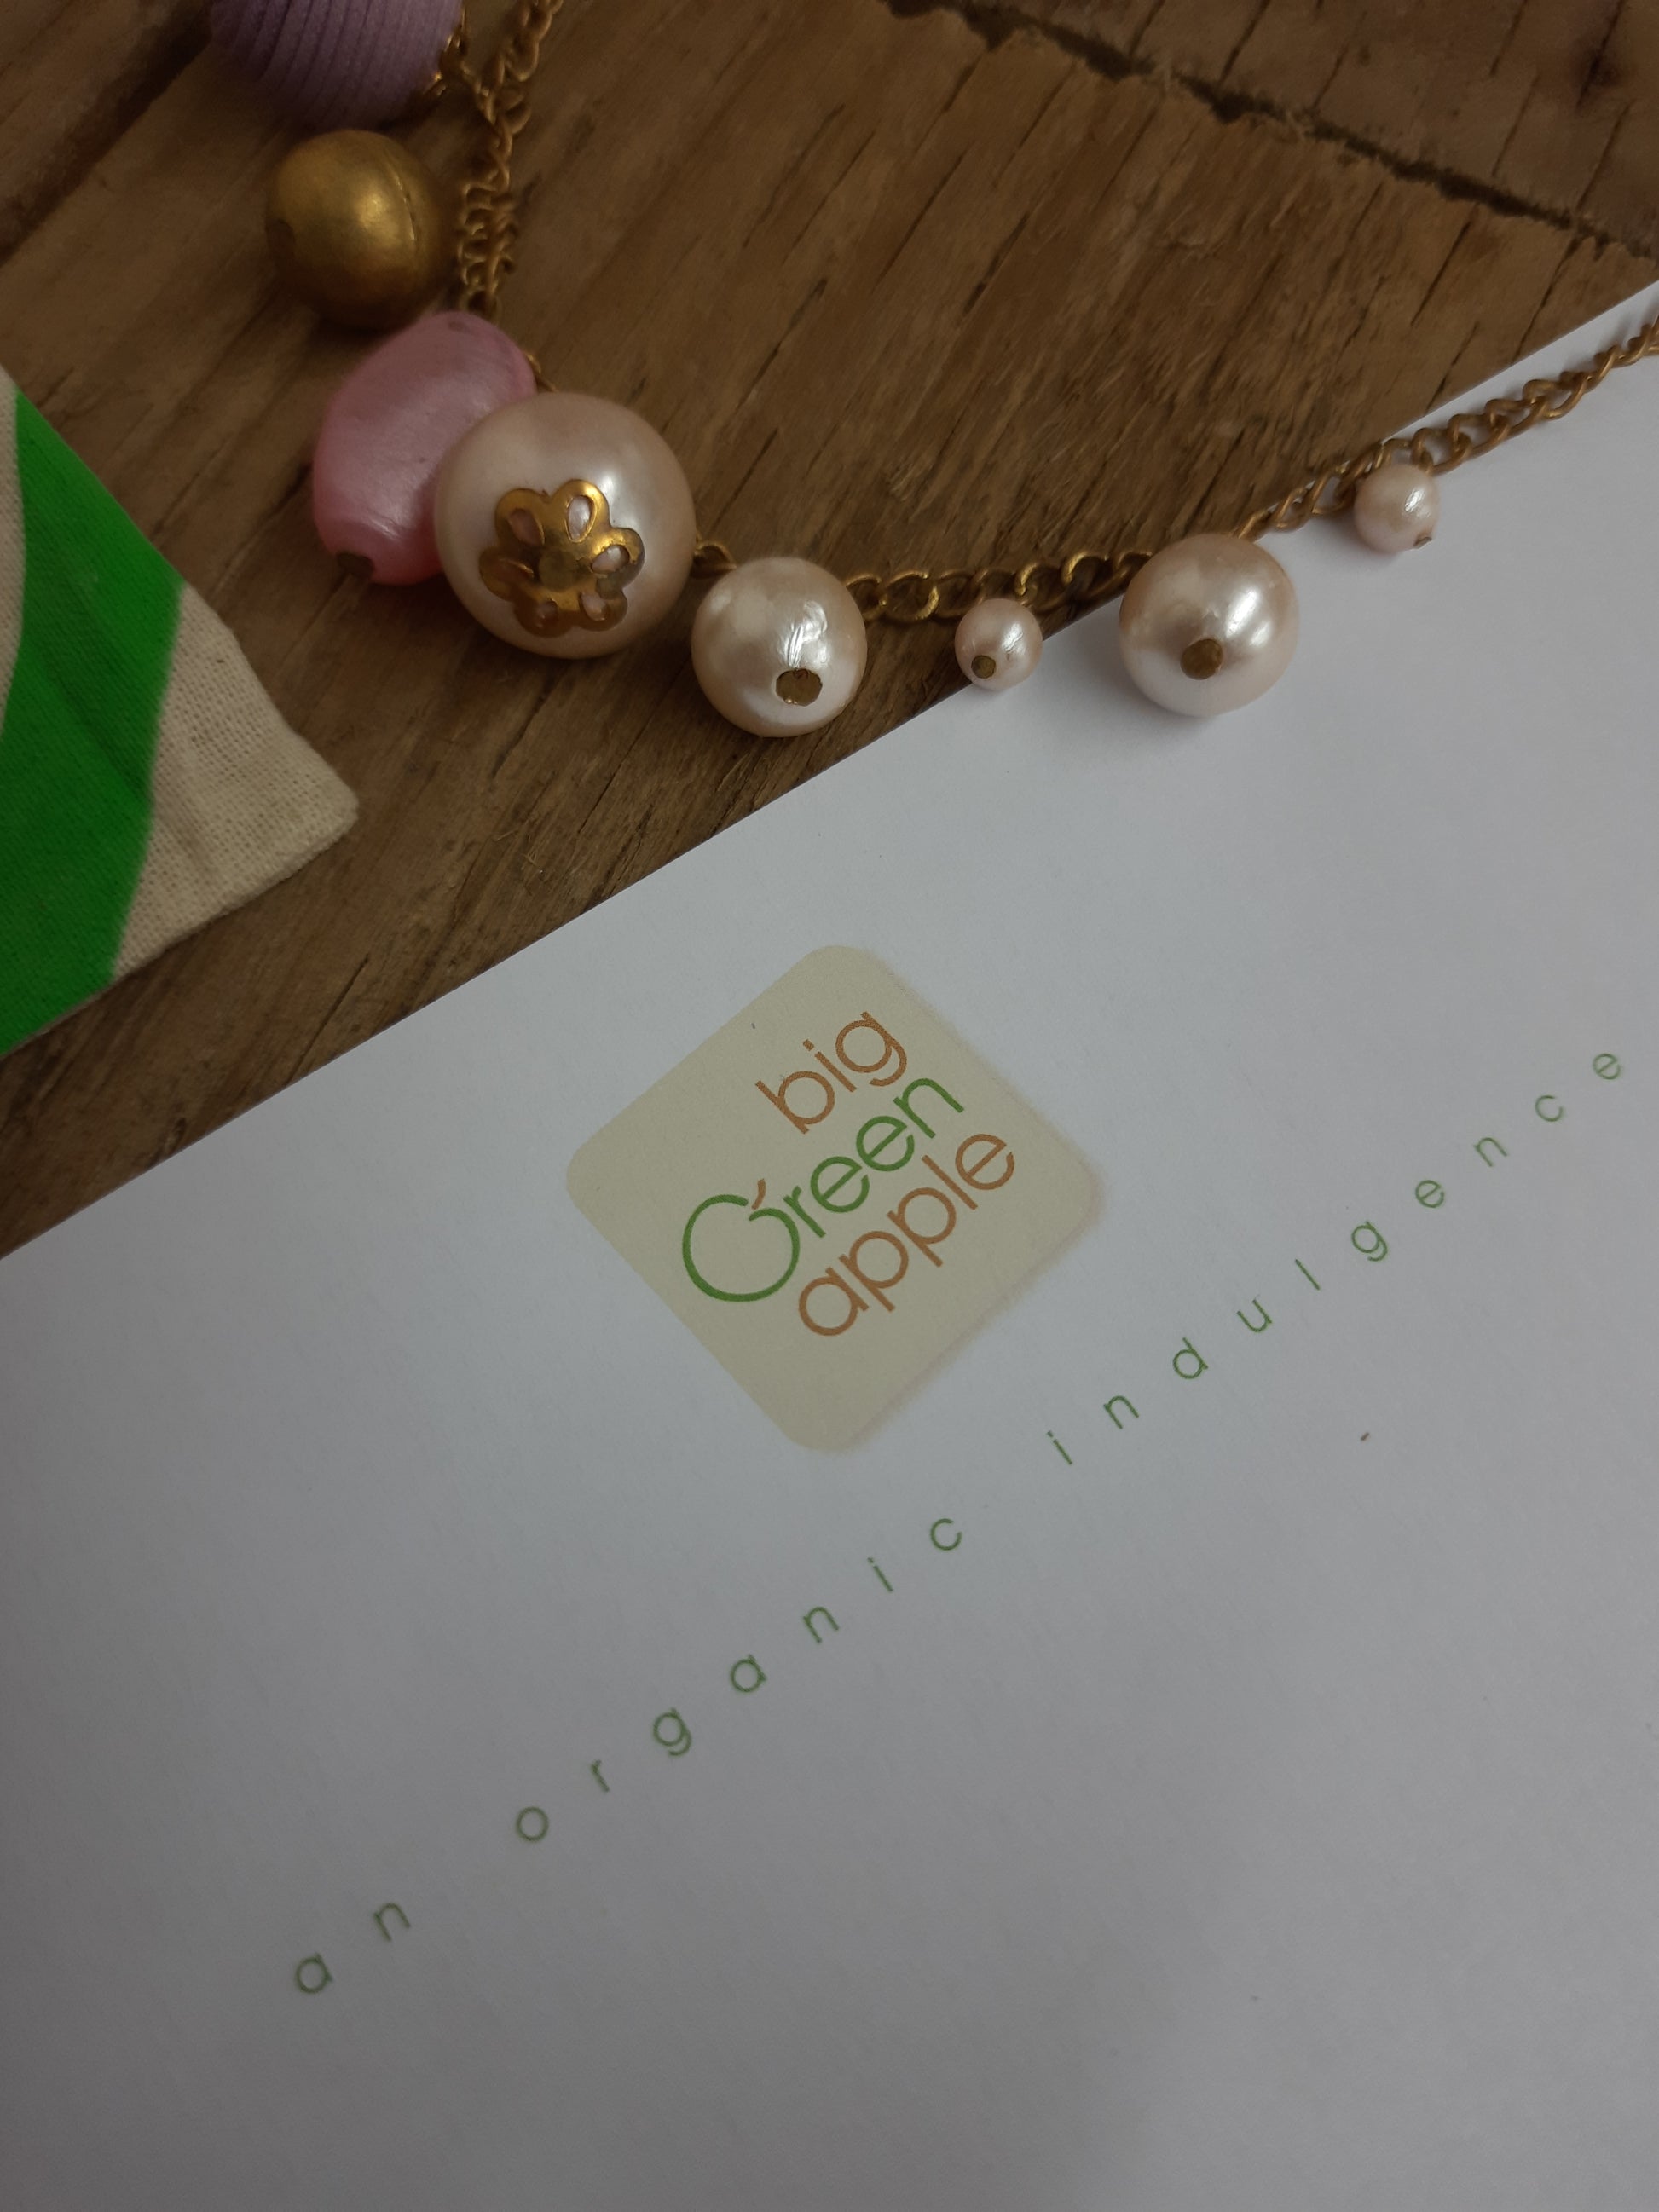 Necklaces, Eco Friendly Companies, Ethical Gifts For Her, Fair Trade Brands, Birthday Gifts For Her, BIG GREEN APPLE